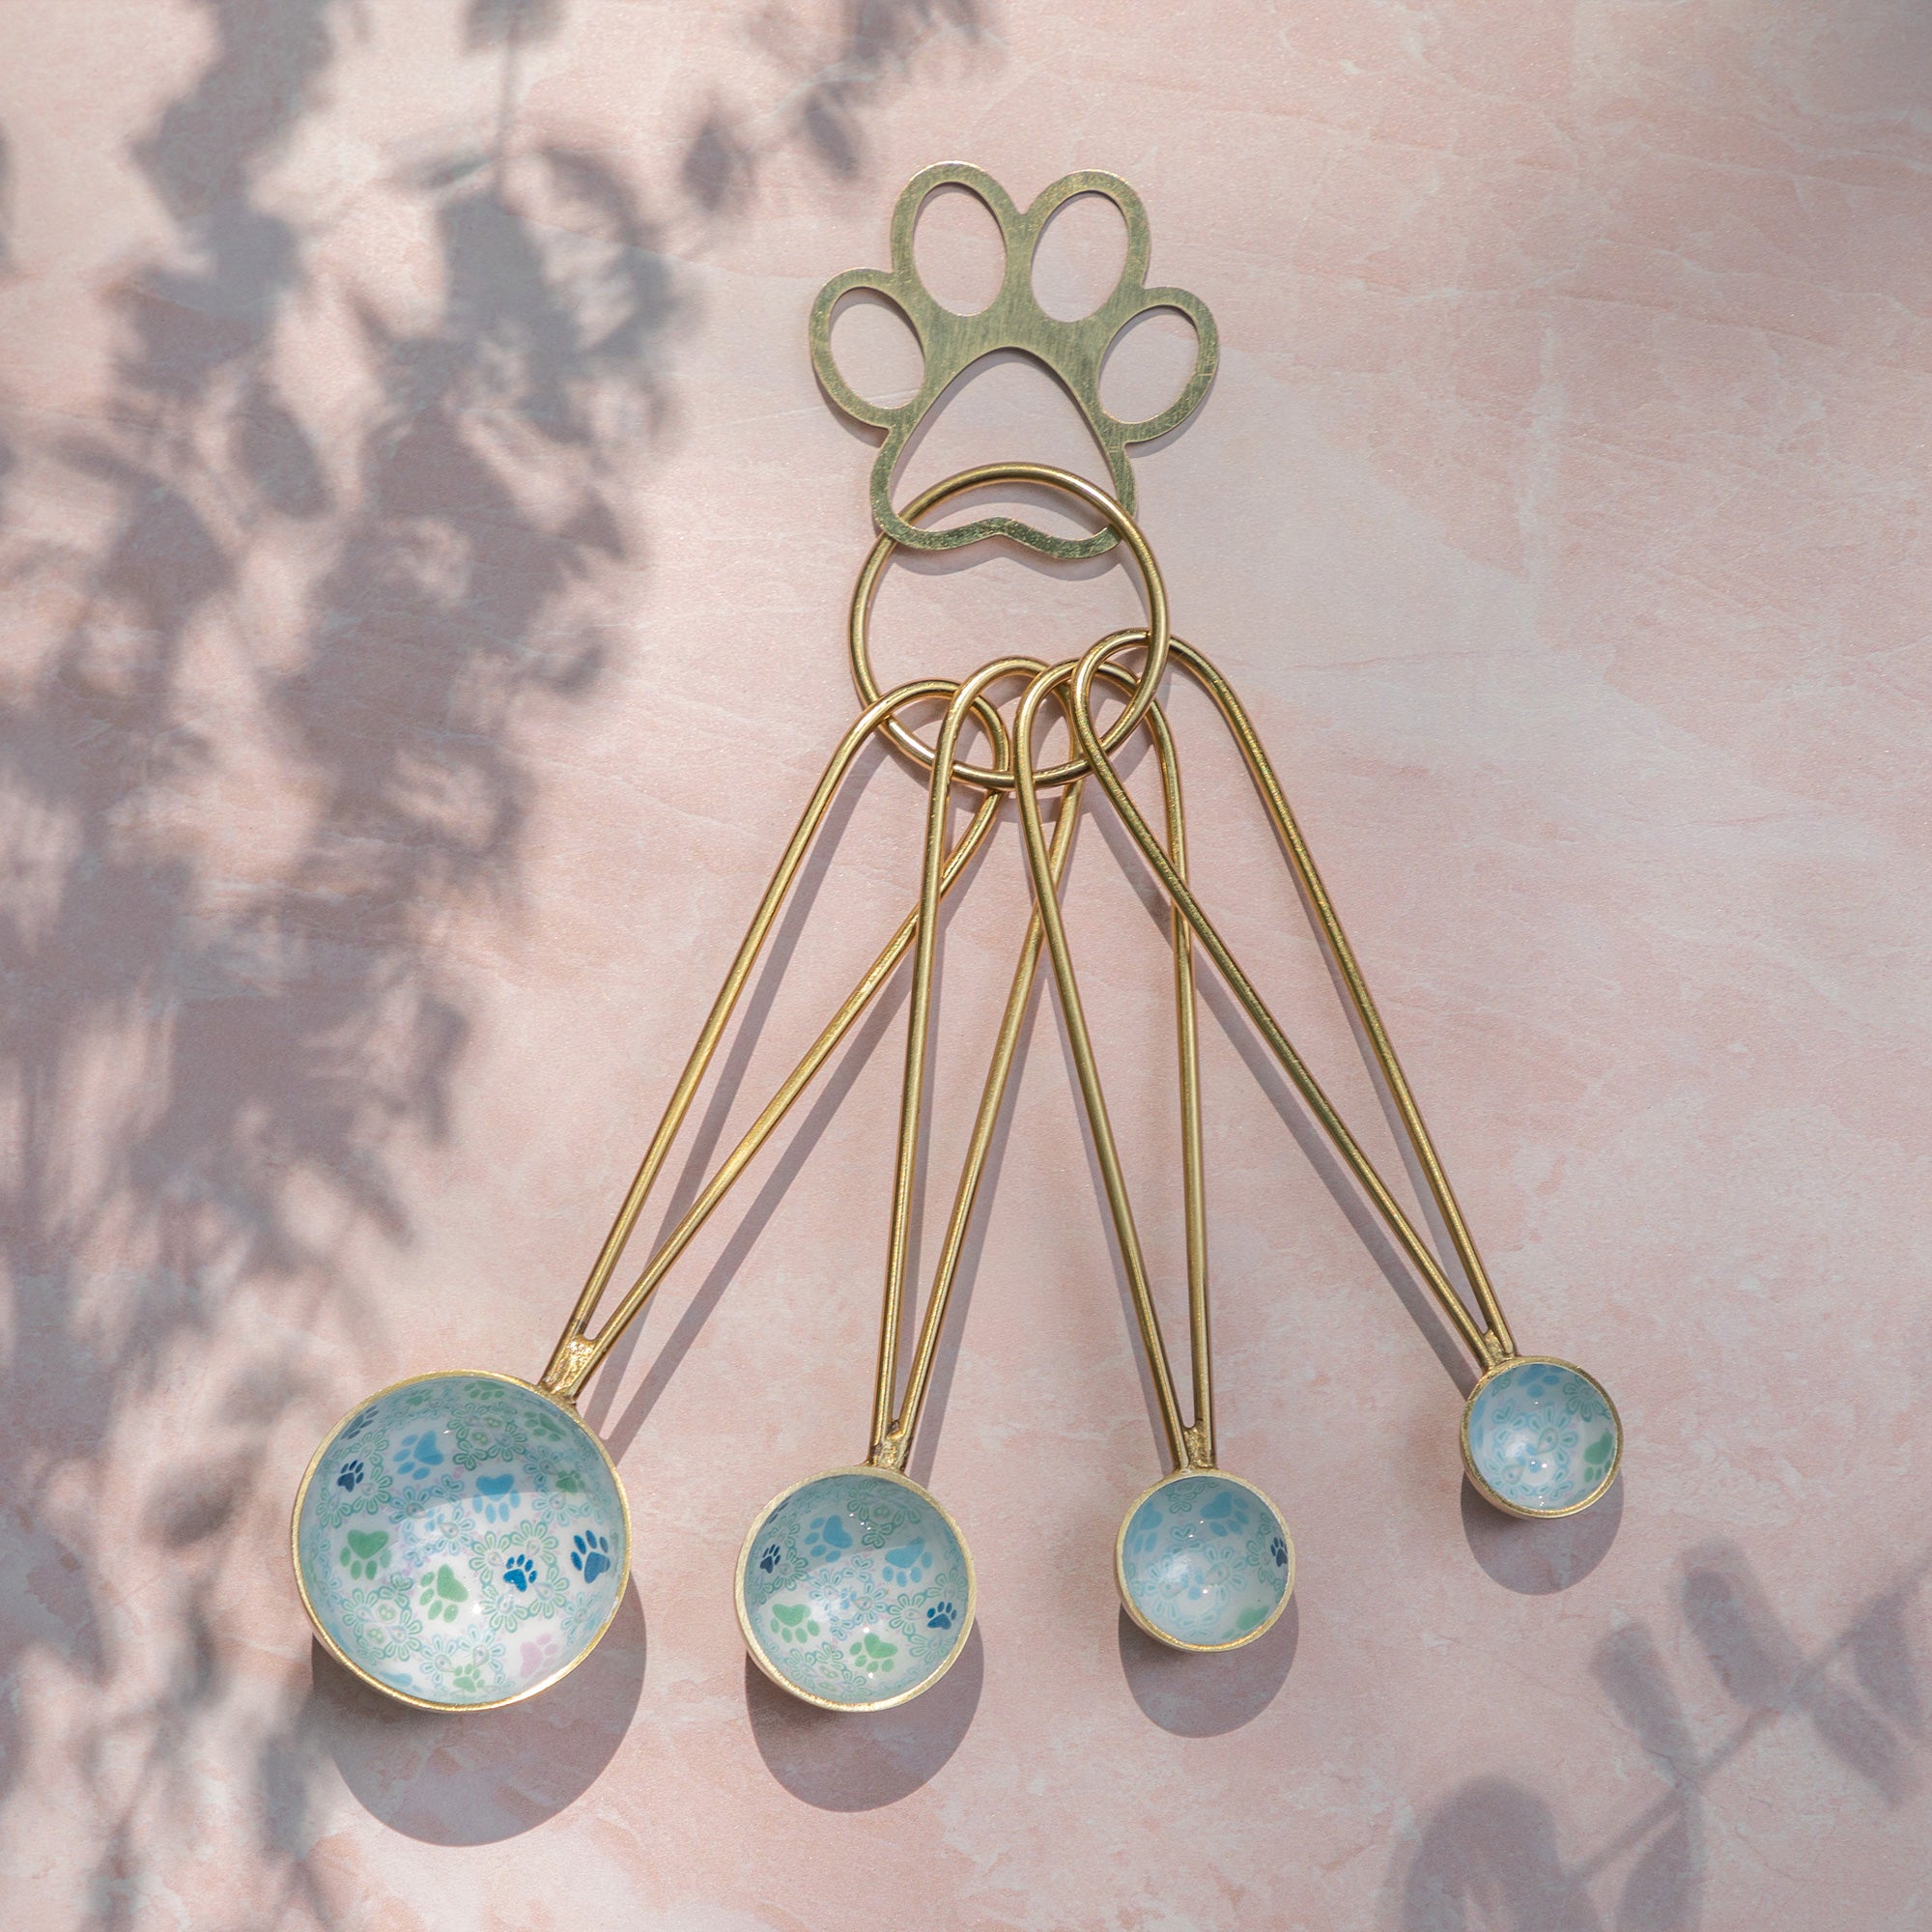 Pawfectly Patterned Measuring Tools - Pastel Paws - Measuring Spoons